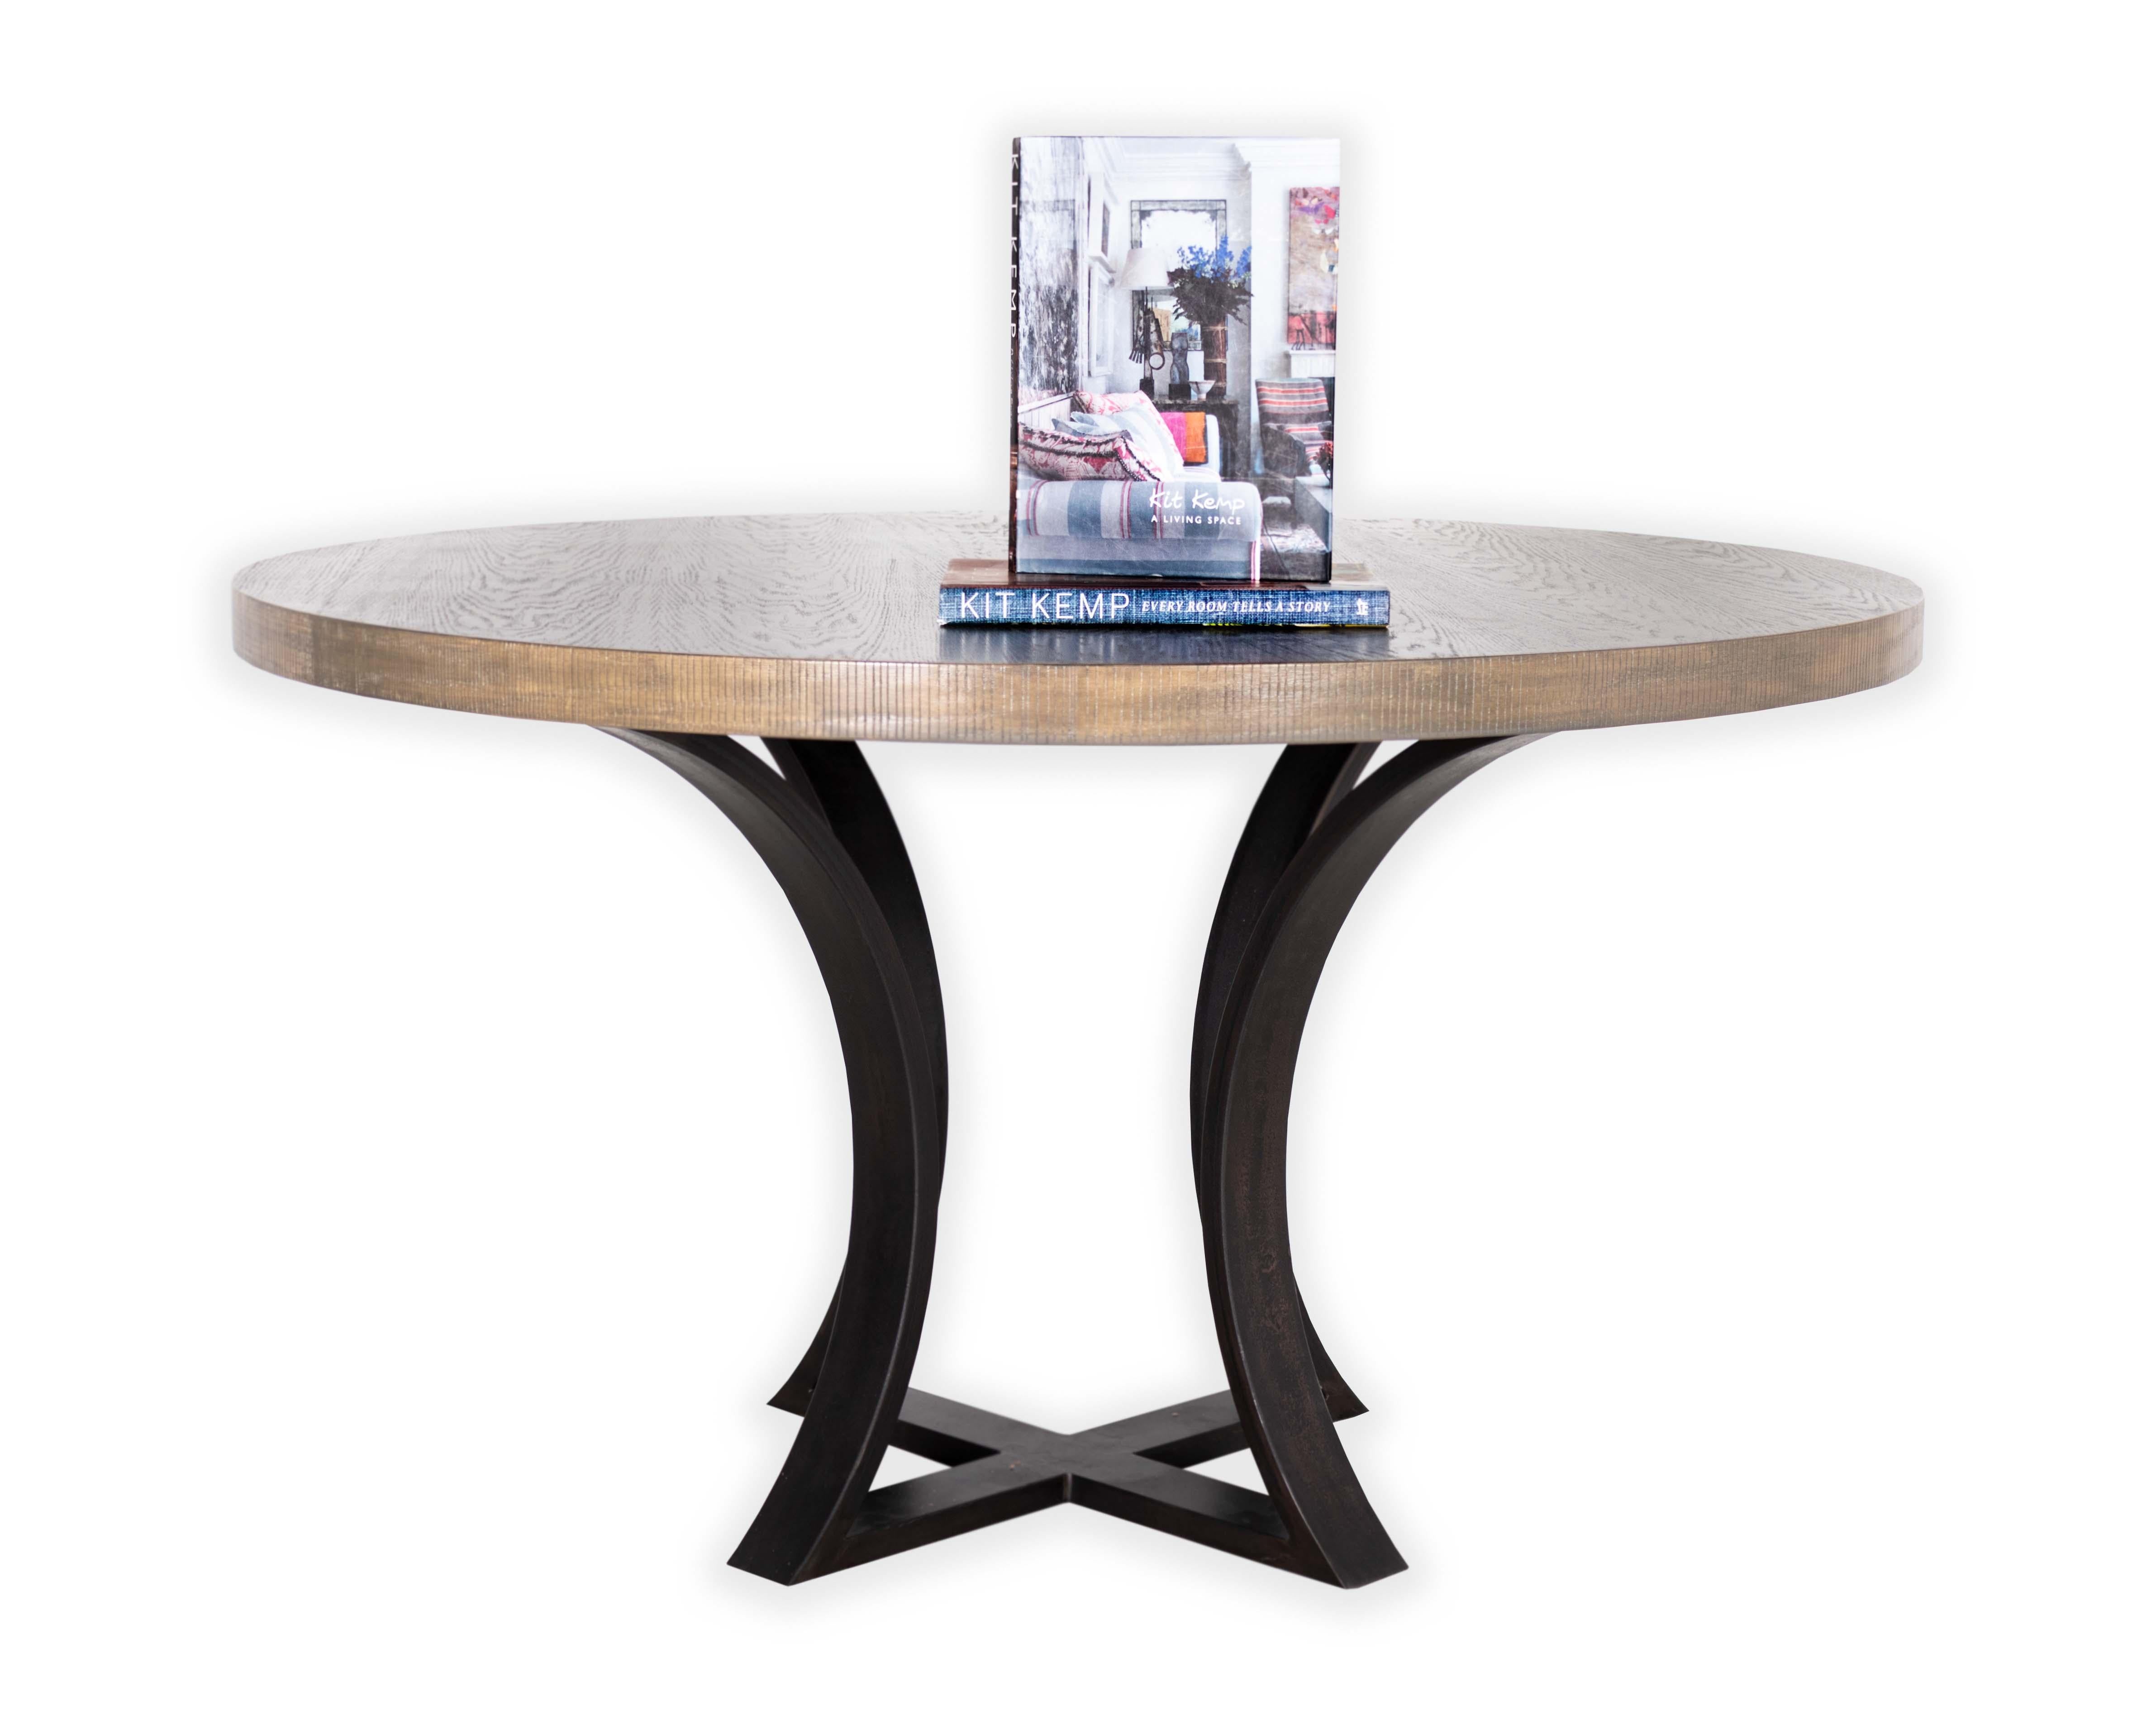 Round oak dining table wit dime edge in a Bombay finish with a ebonized curved leg base. 
This item is crafted from natural materials. Coloring and detailing may vary, adding to its uniqueness.

Dimensions, stone type and metal finish can be